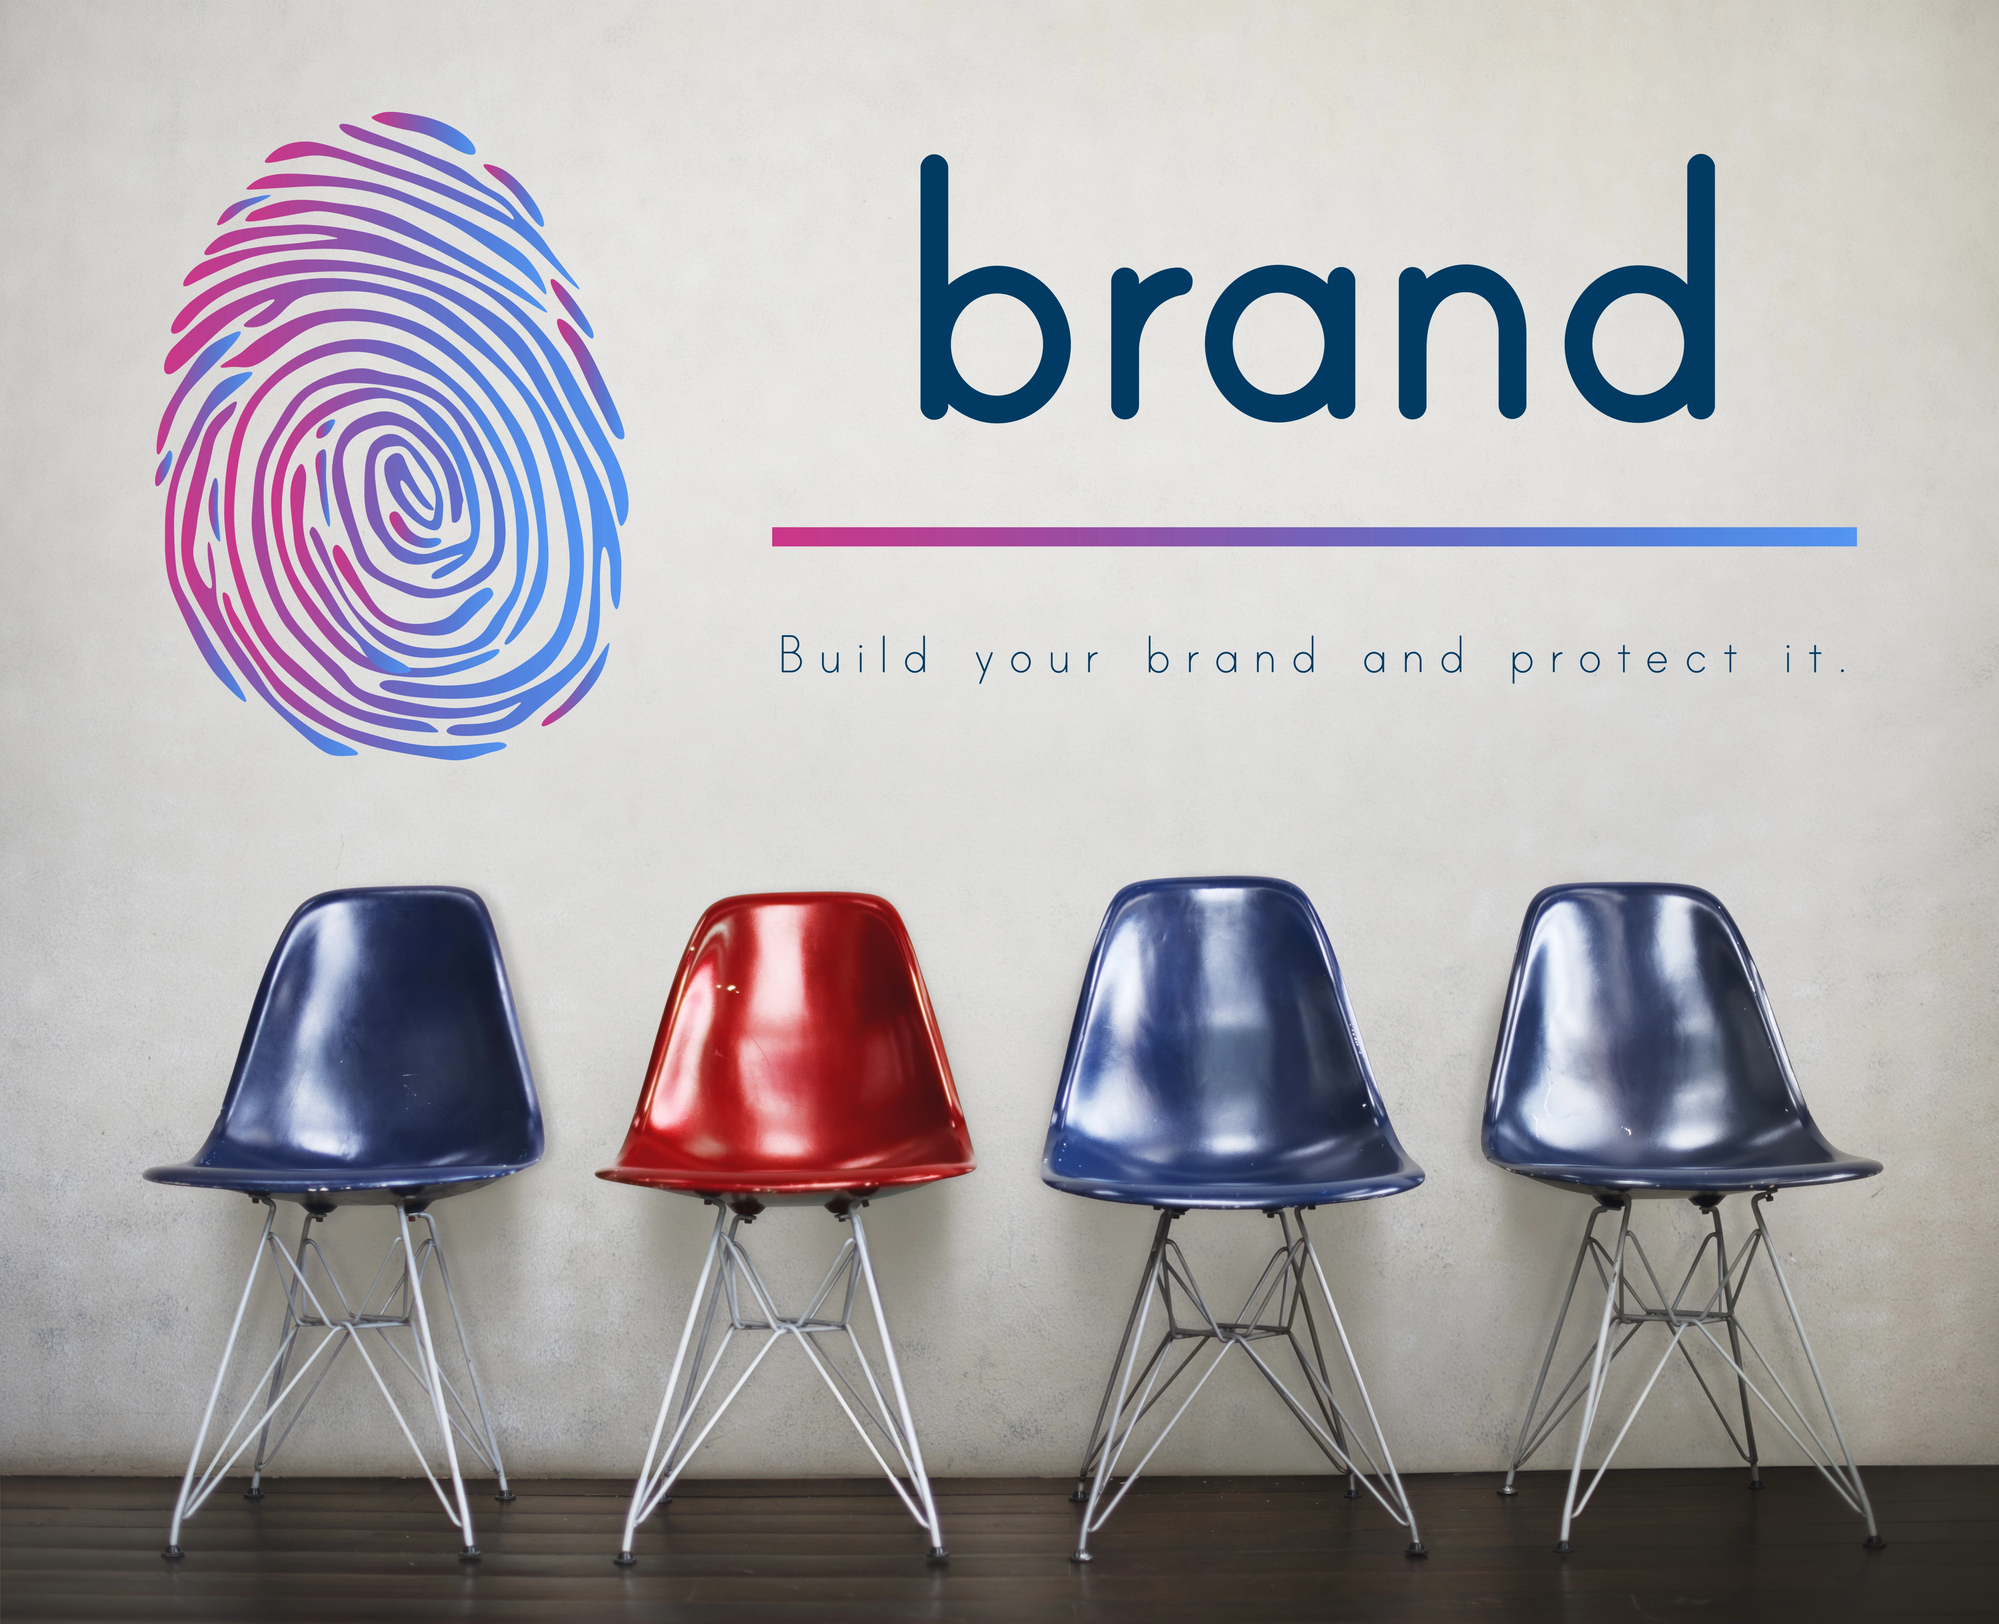 Four modern chairs (three blue, one red) are lined up against a wall adorned with a large colorful fingerprint graphic and the word "brand" beside it. Below "brand," the text reads: "Build your brand and protect it." The wooden floor complements this stylish take on branding.